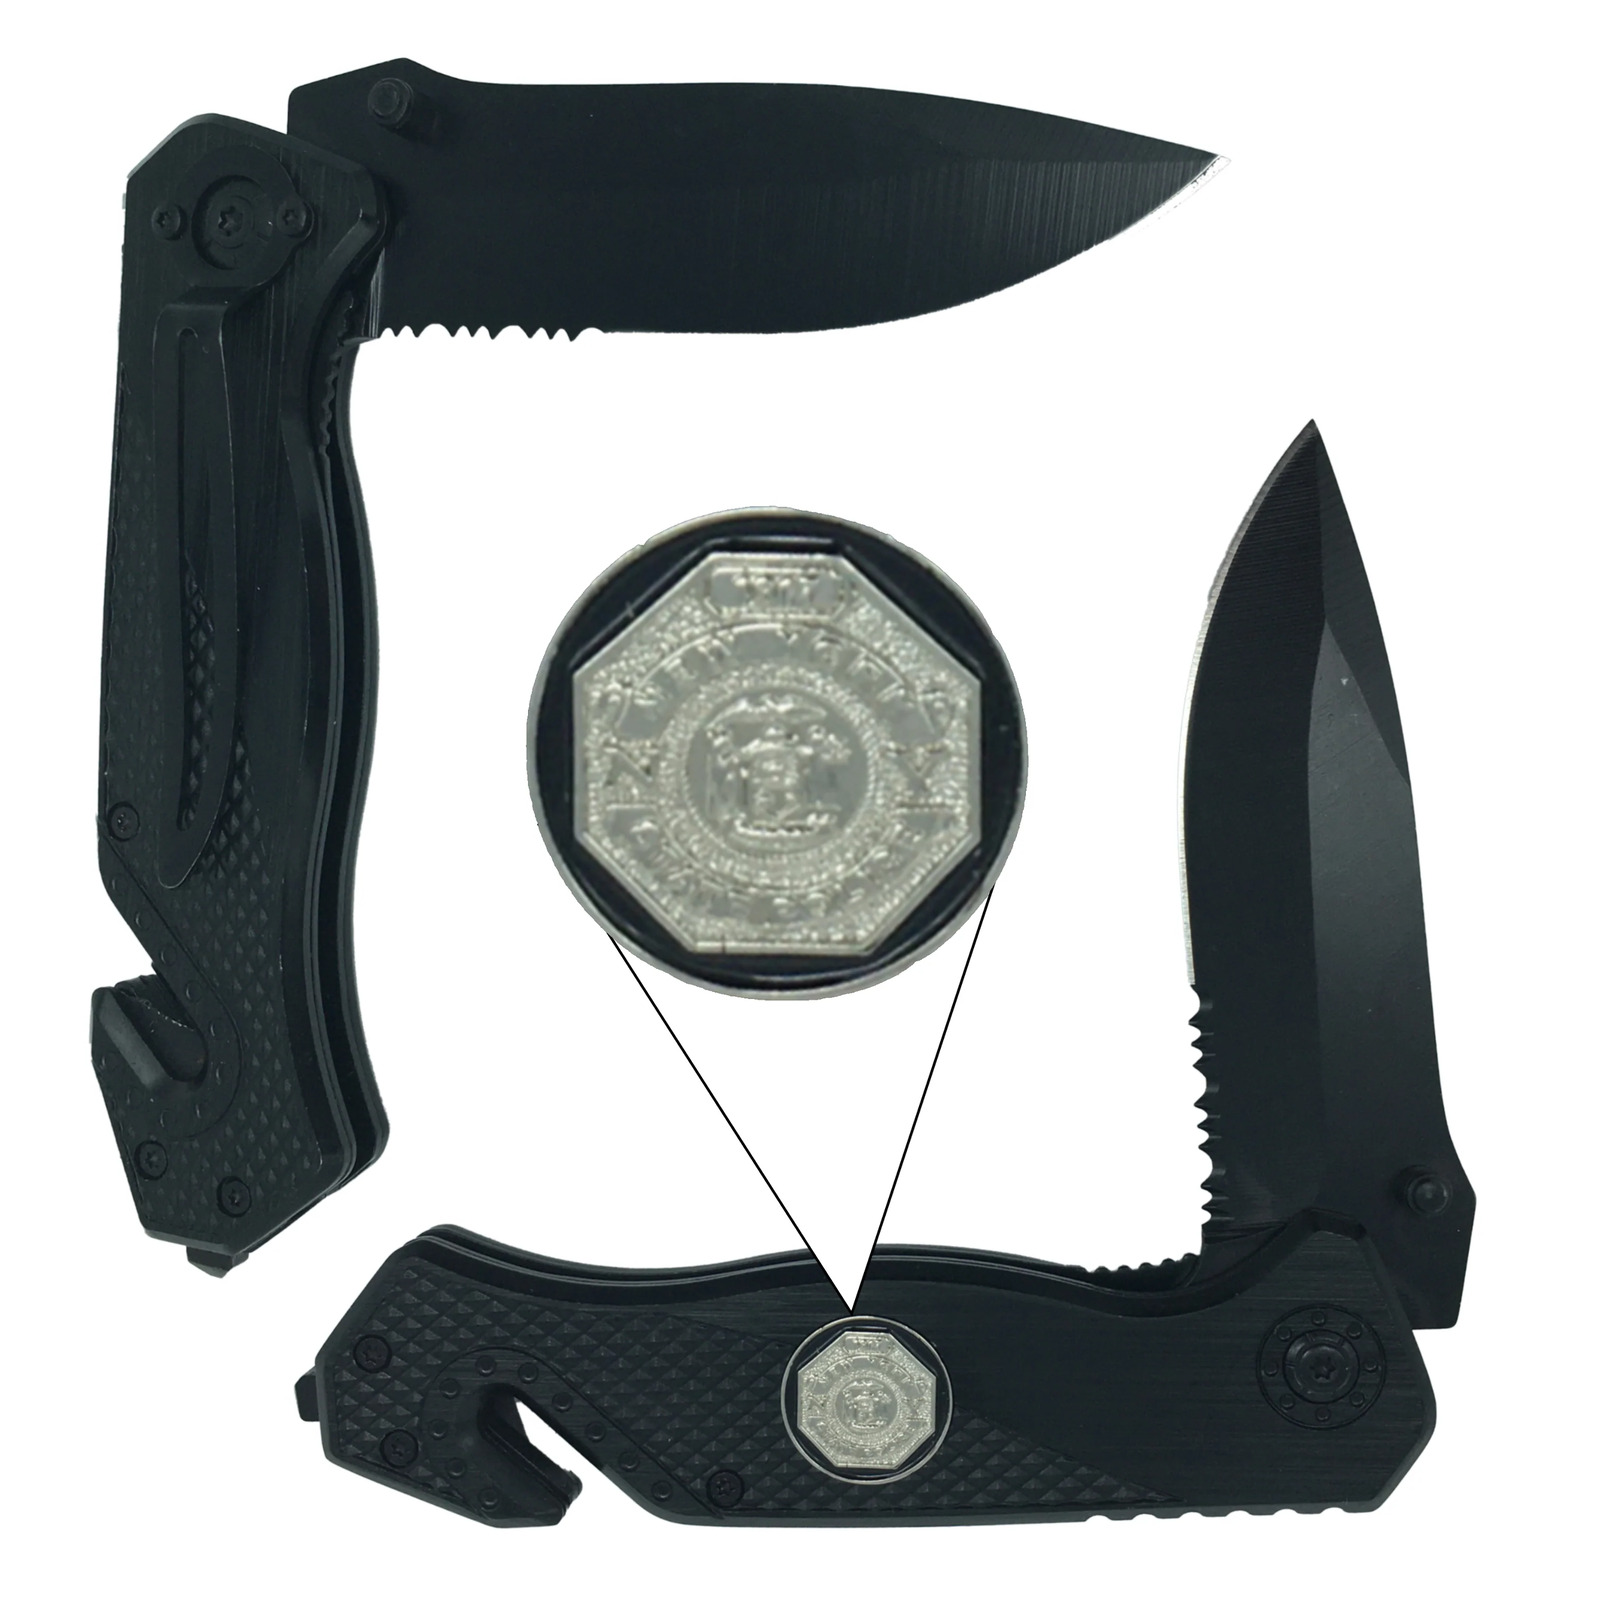 NYSP New York State Police collectible 3-in-1 Police Tactical Rescue Knife with